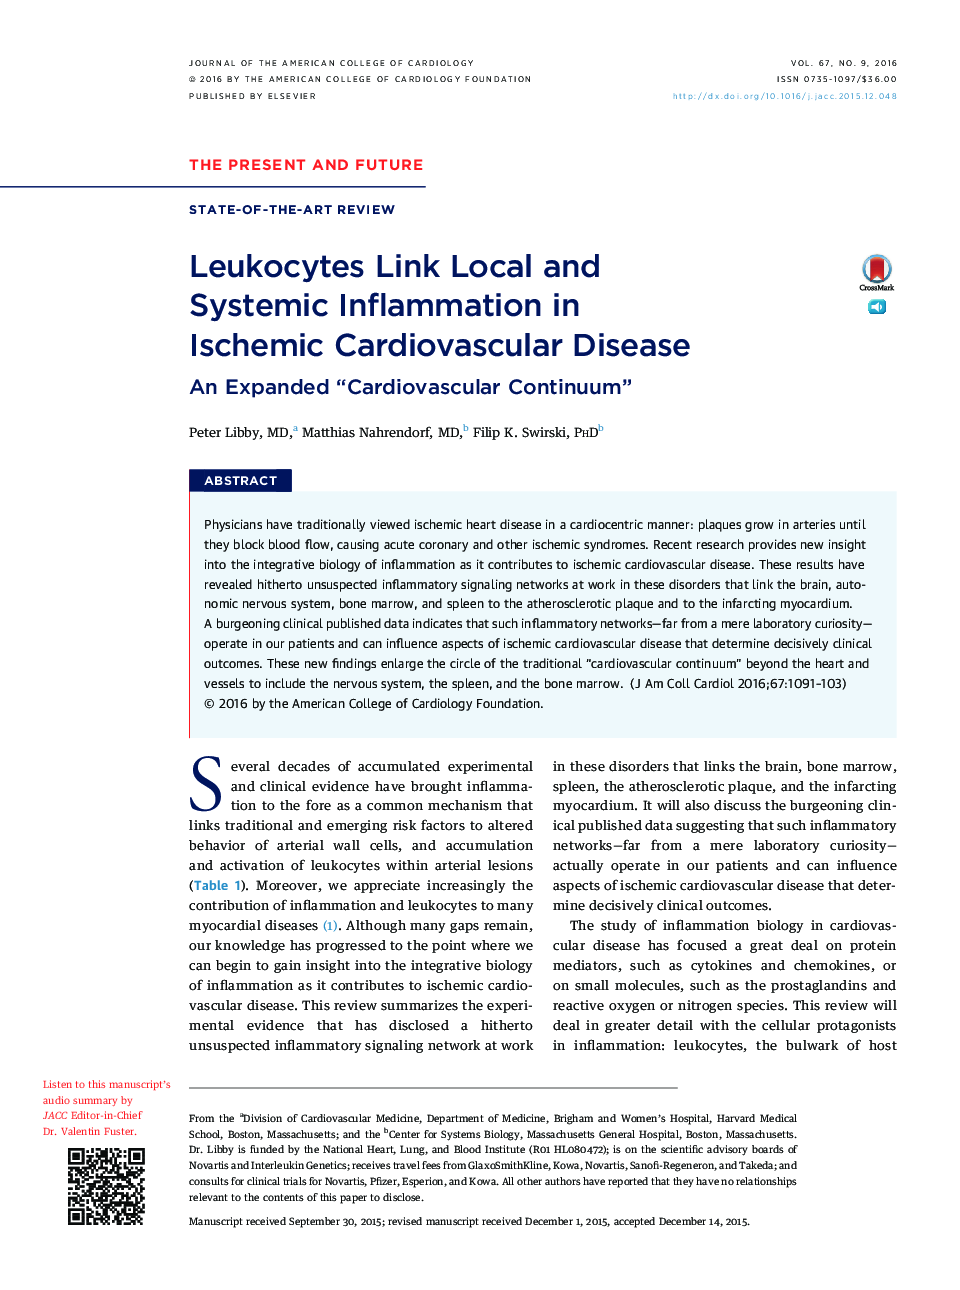 Leukocytes Link Local and SystemicÂ Inflammation in IschemicÂ CardiovascularÂ Disease: An Expanded “Cardiovascular Continuum”